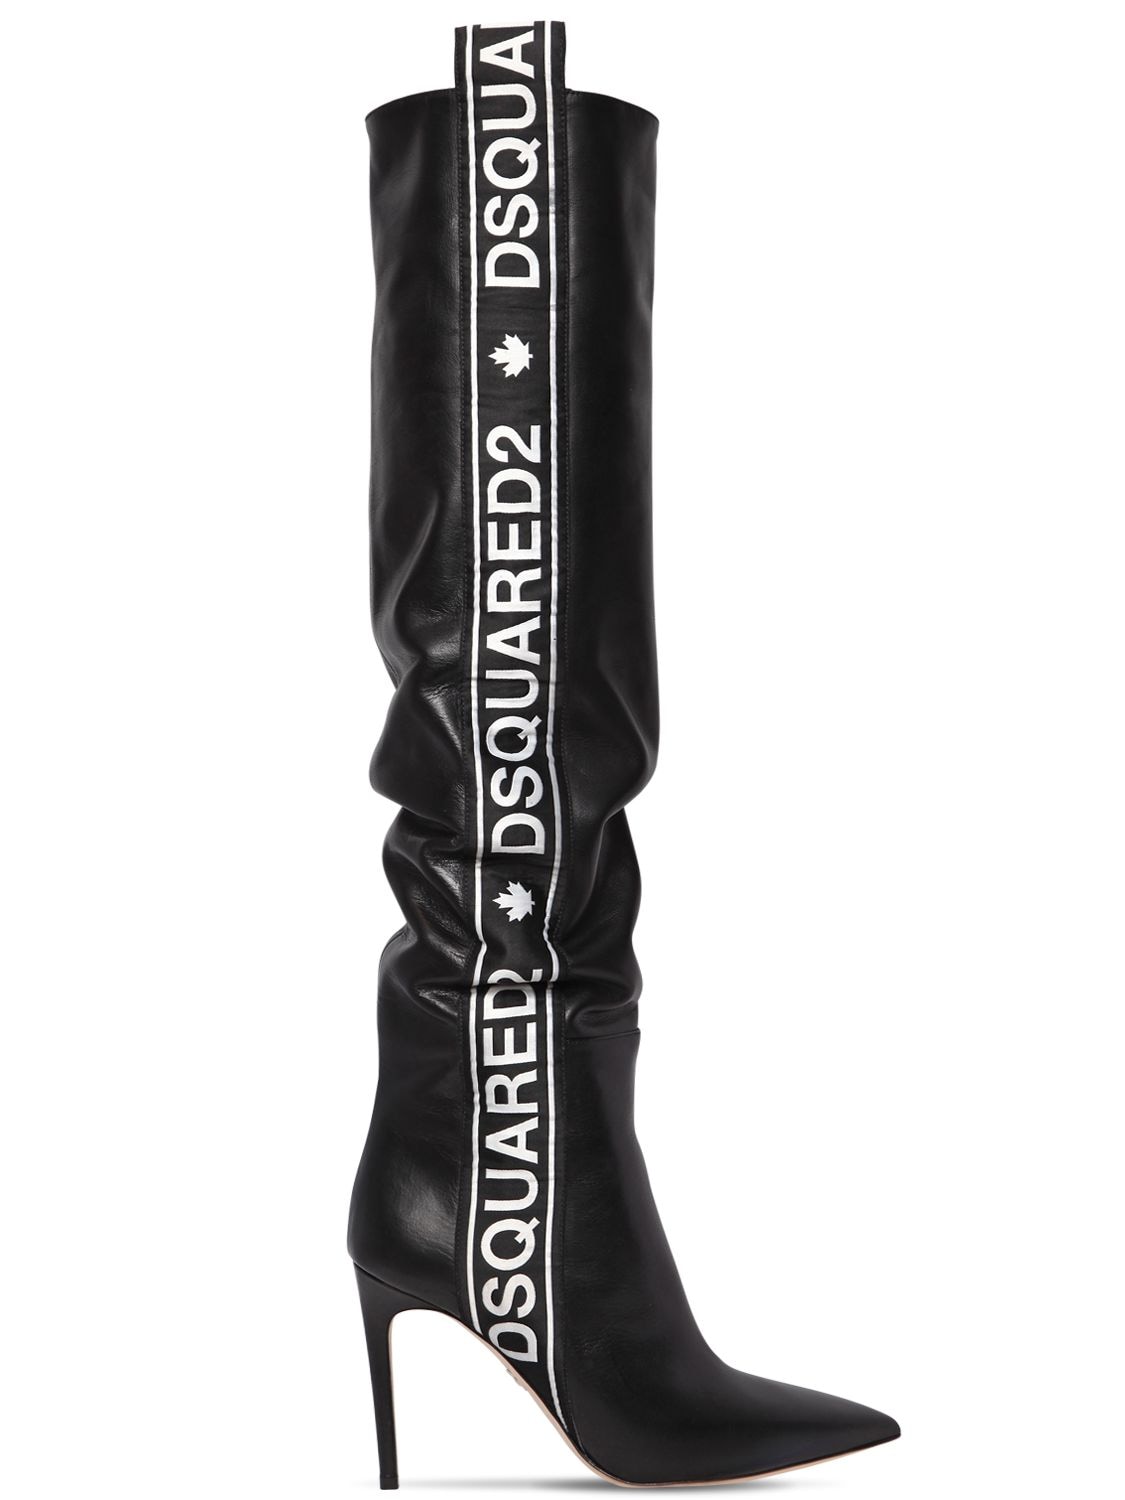 DSQUARED2 90MM LOGO LEATHER OVER THE KNEE BOOTS,68I0EO009-MJEYNA2